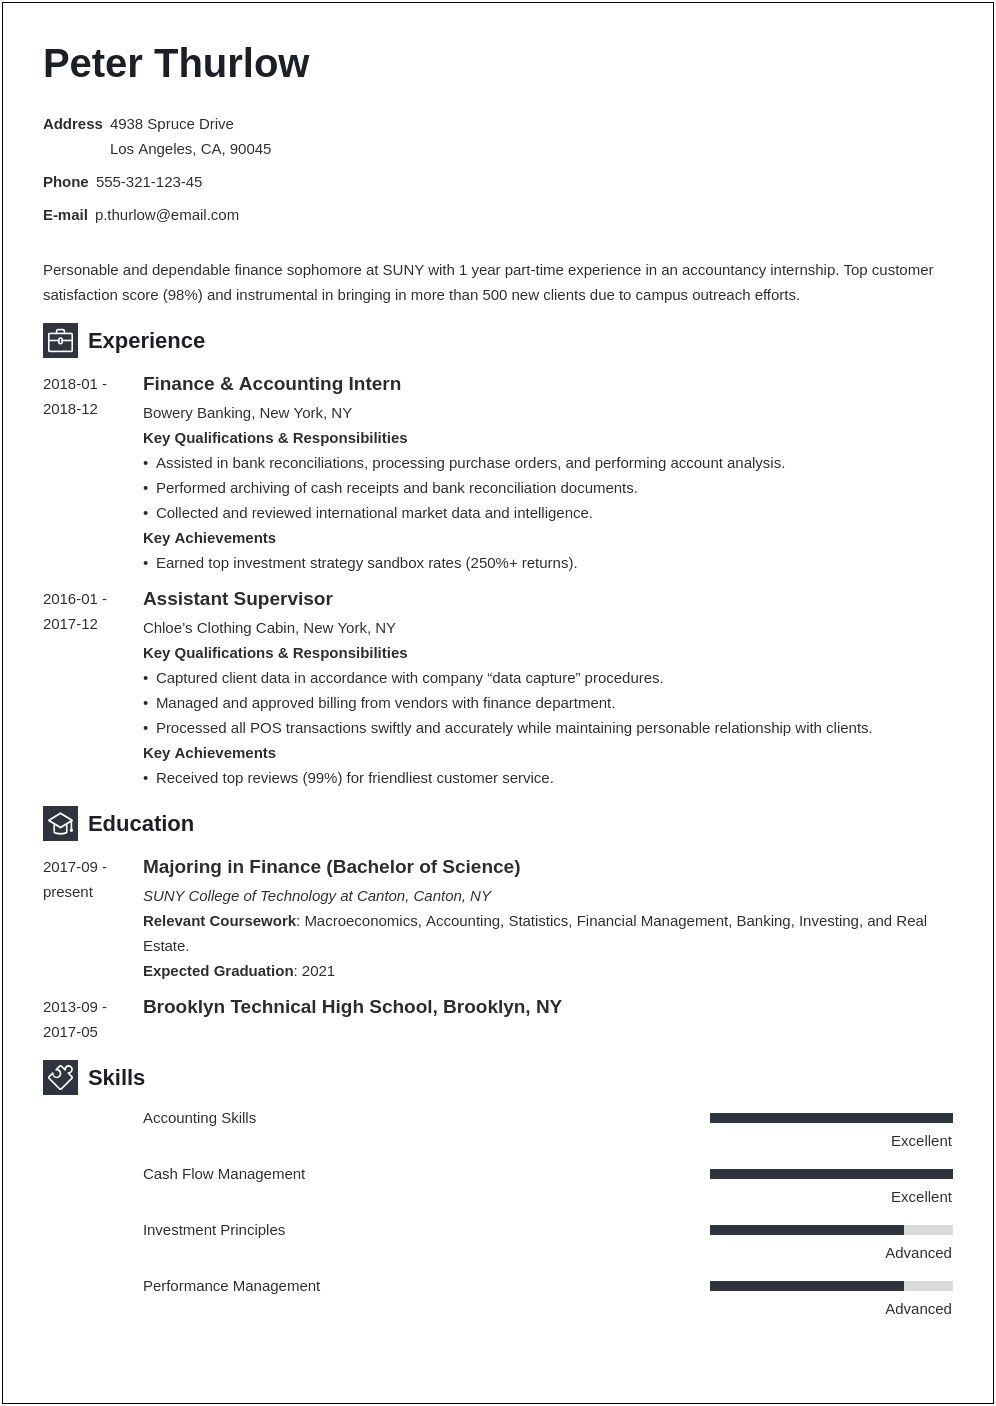 Resume Set Up With Intern Experience